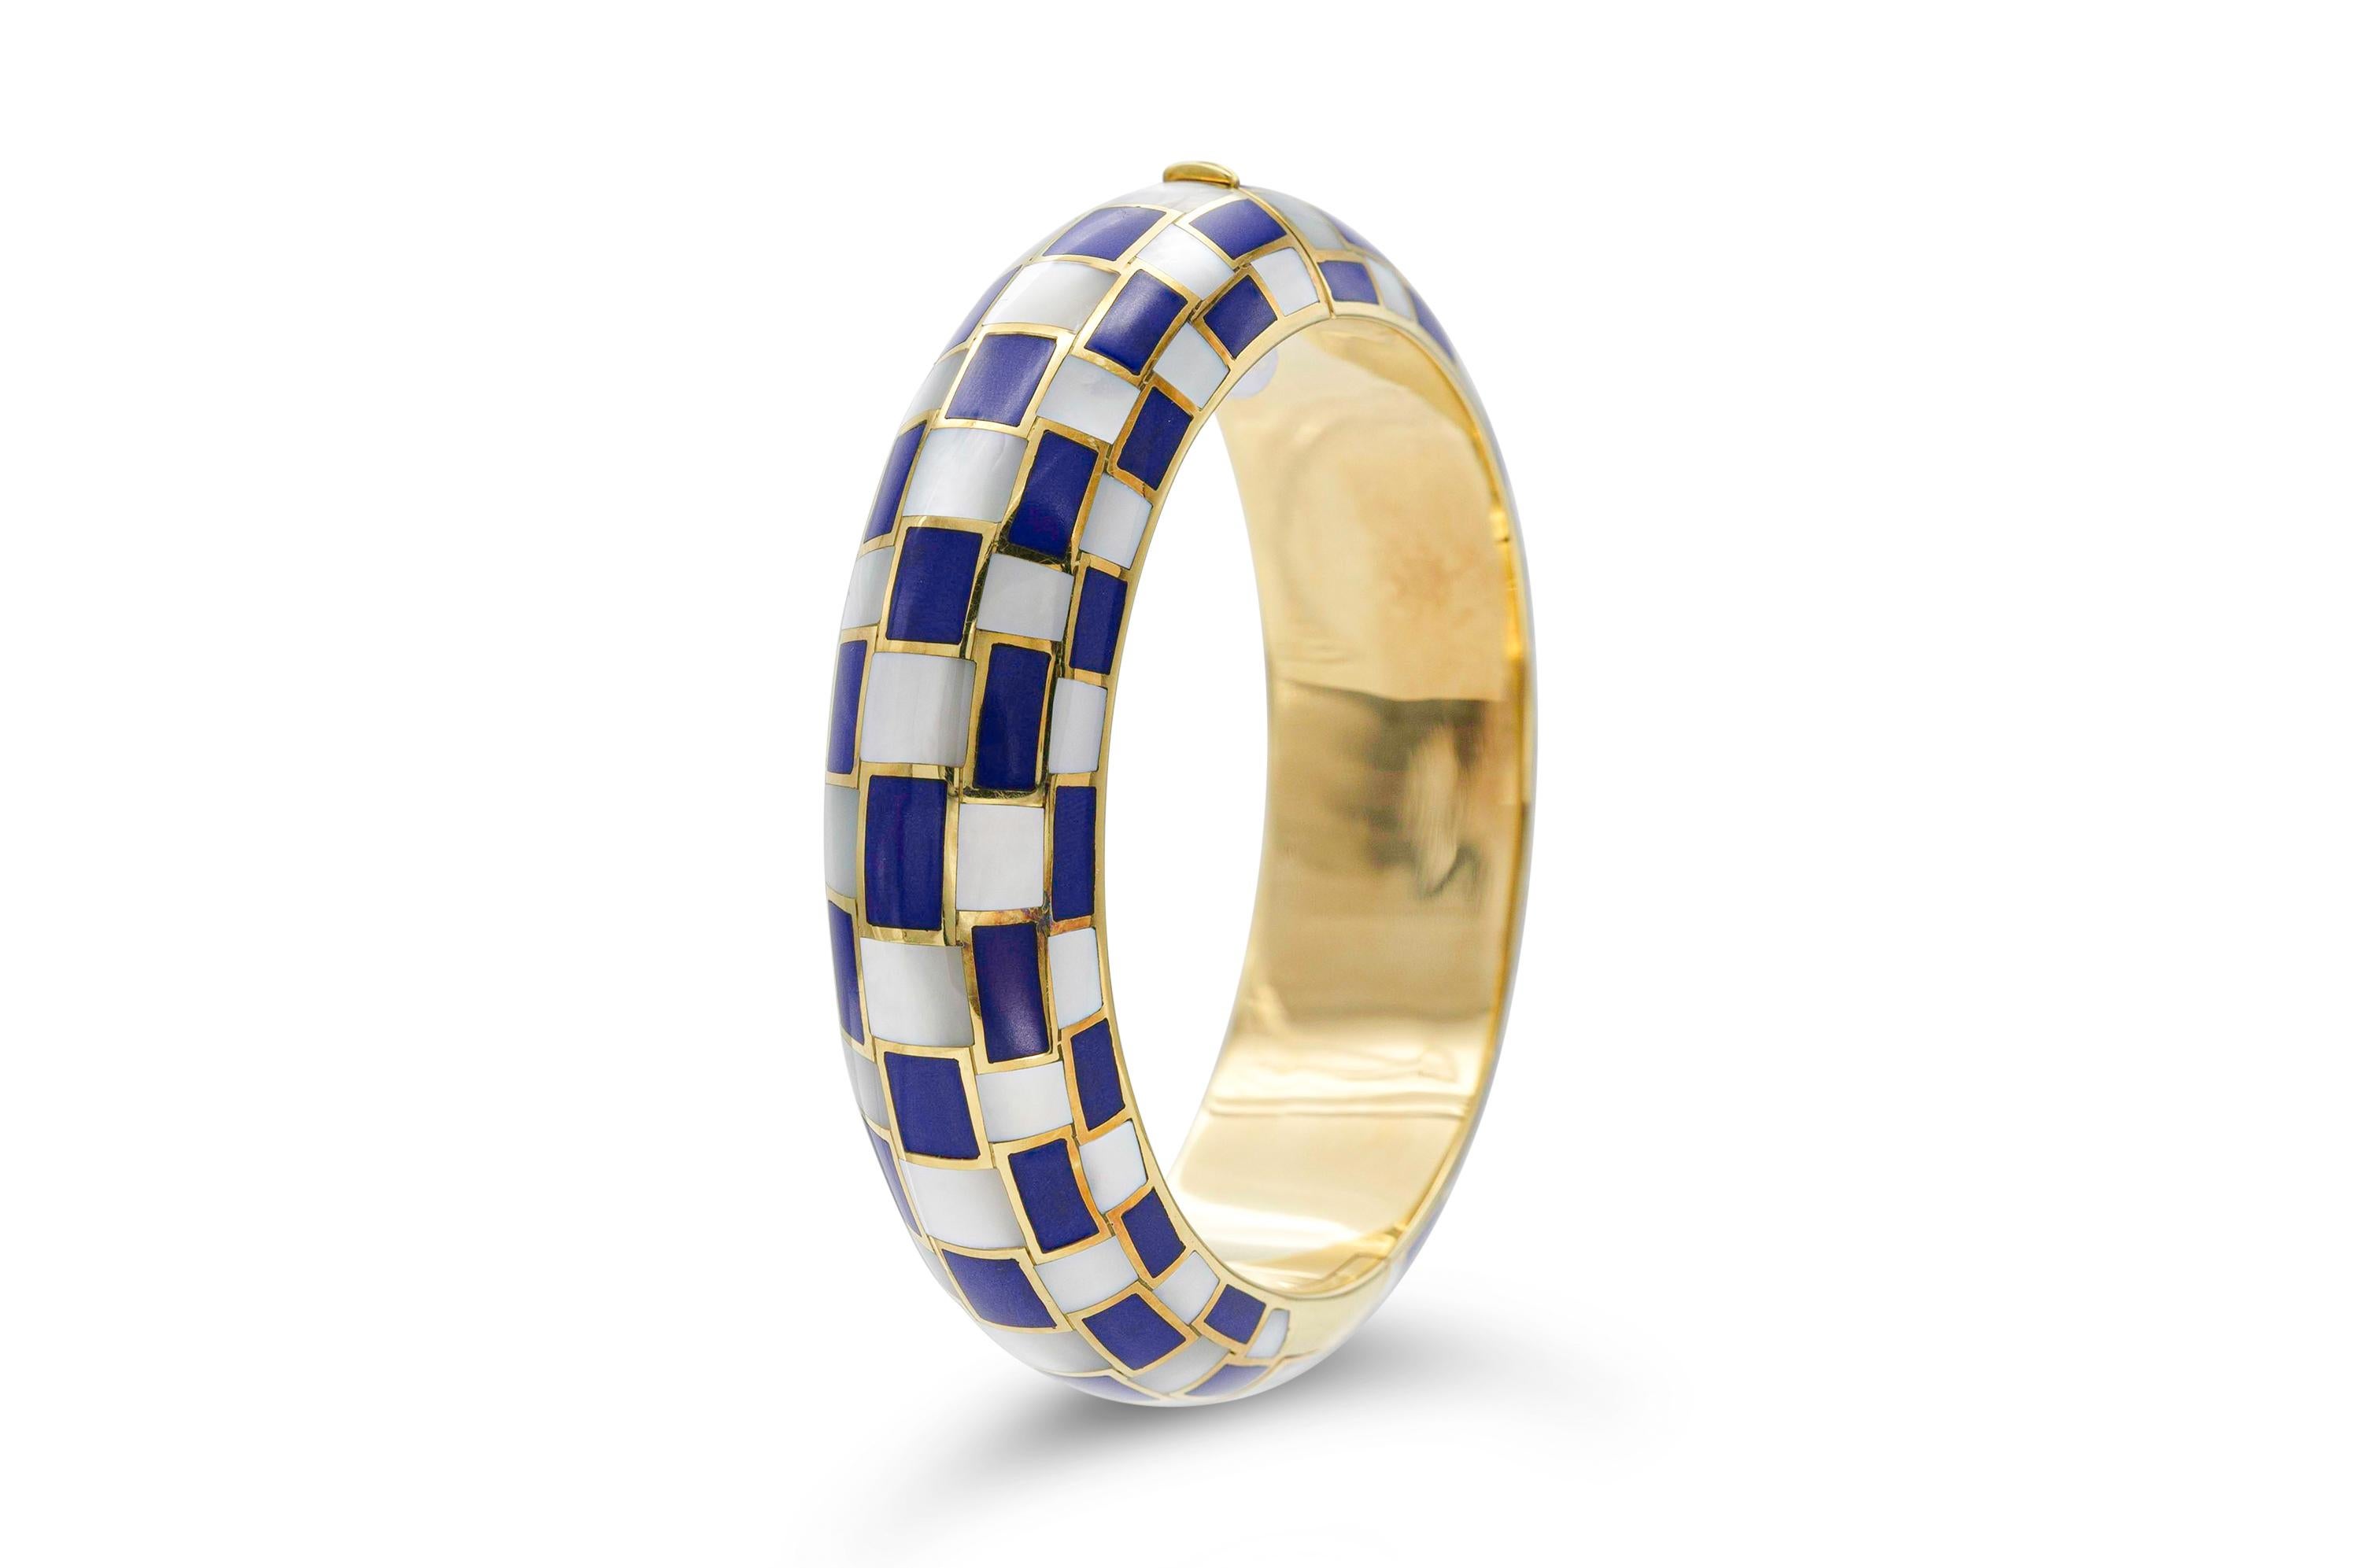 Finely crafted in 18k yellow gold with Lapis and Mother of Pearl.
Signed by Tiffany & Co. and Angela Cummings
Size 6 1/2 inches